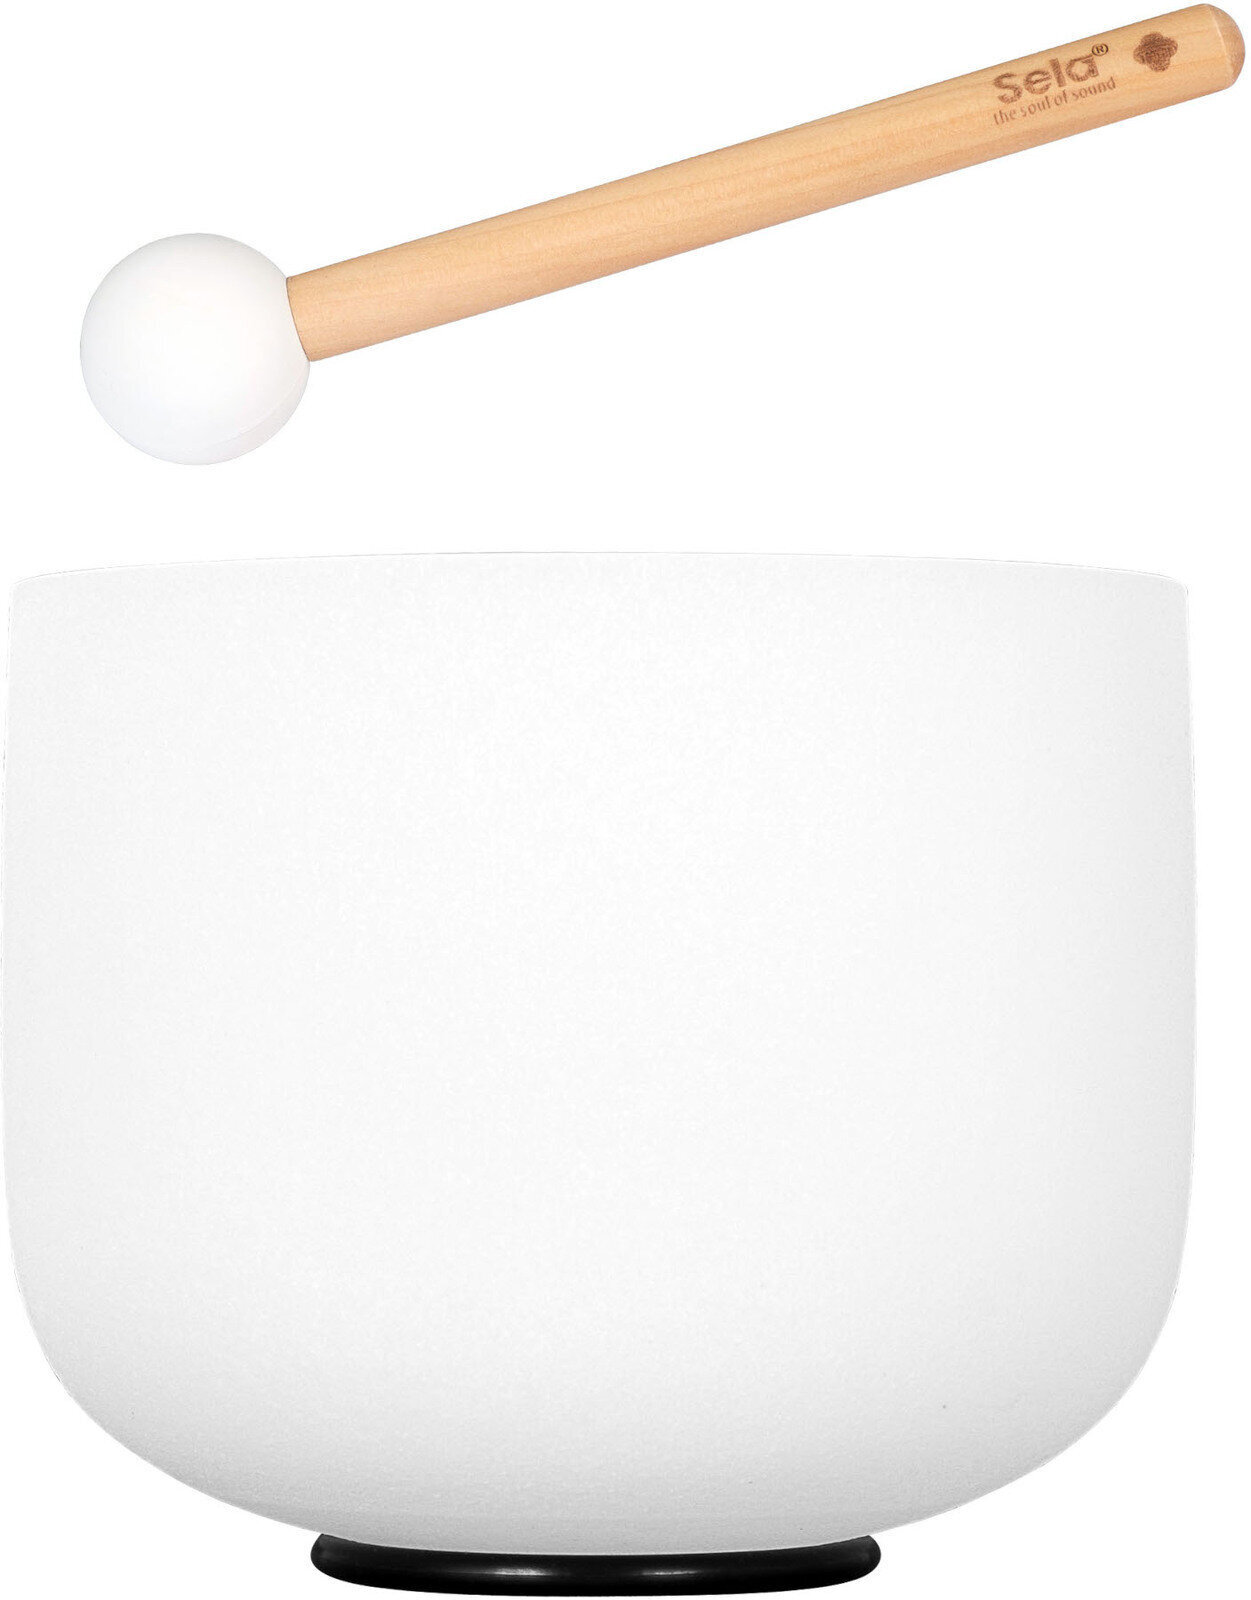 Percussion for music therapy Sela 10" Crystal Singing Bowl Frosted 432 Hz F incl. 1 Wood Mallet